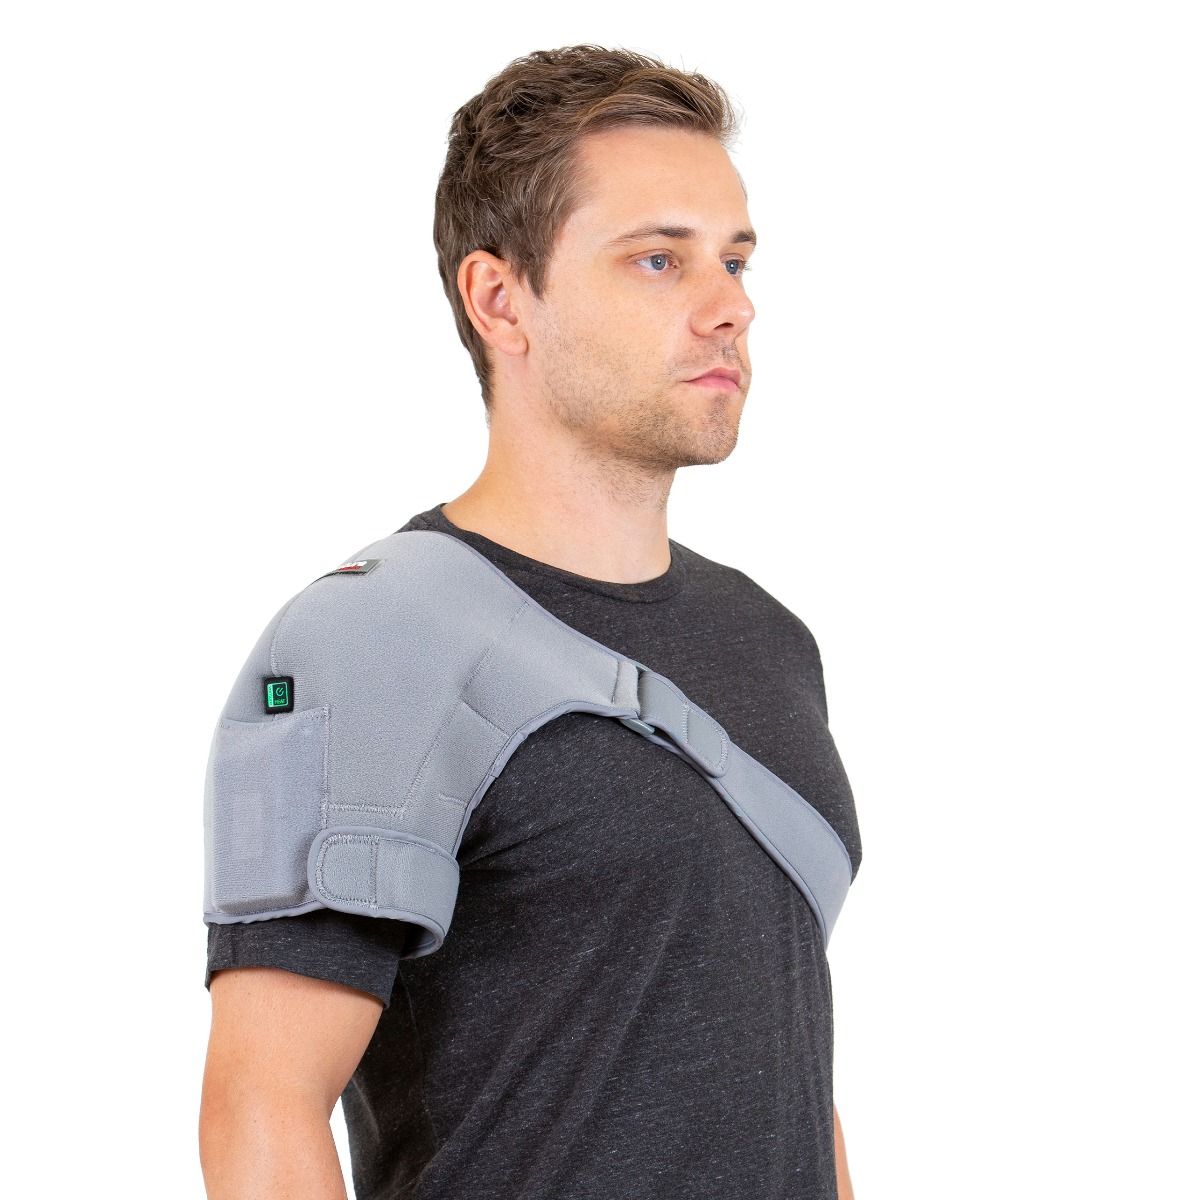 At-Home Infrared Heat Therapy Shoulder Wrap